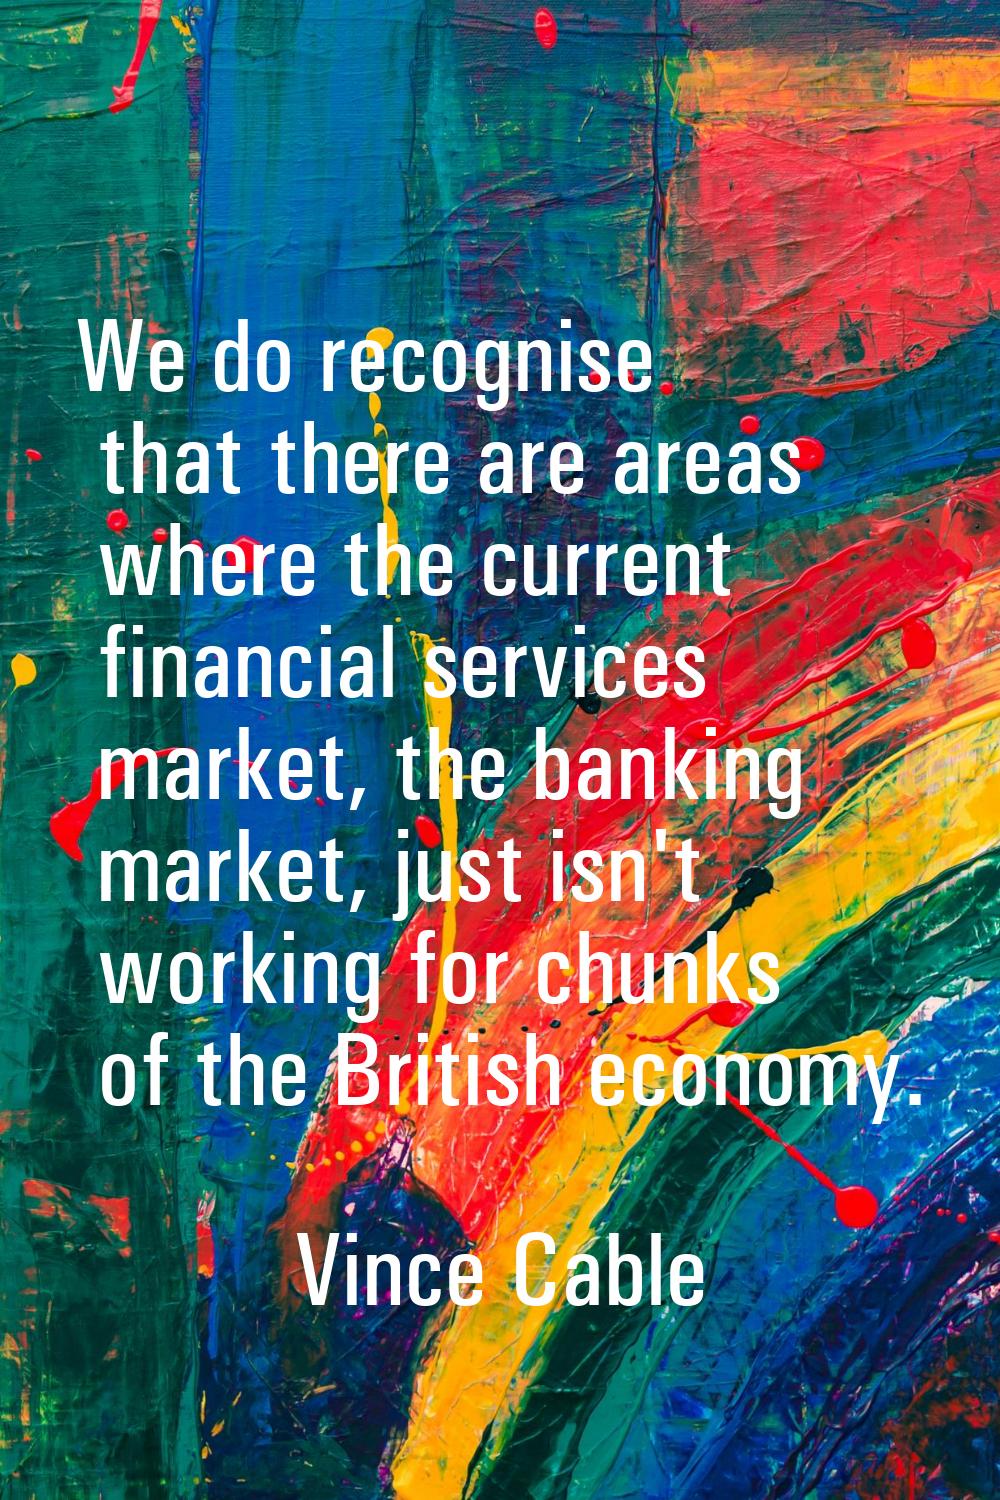 We do recognise that there are areas where the current financial services market, the banking marke